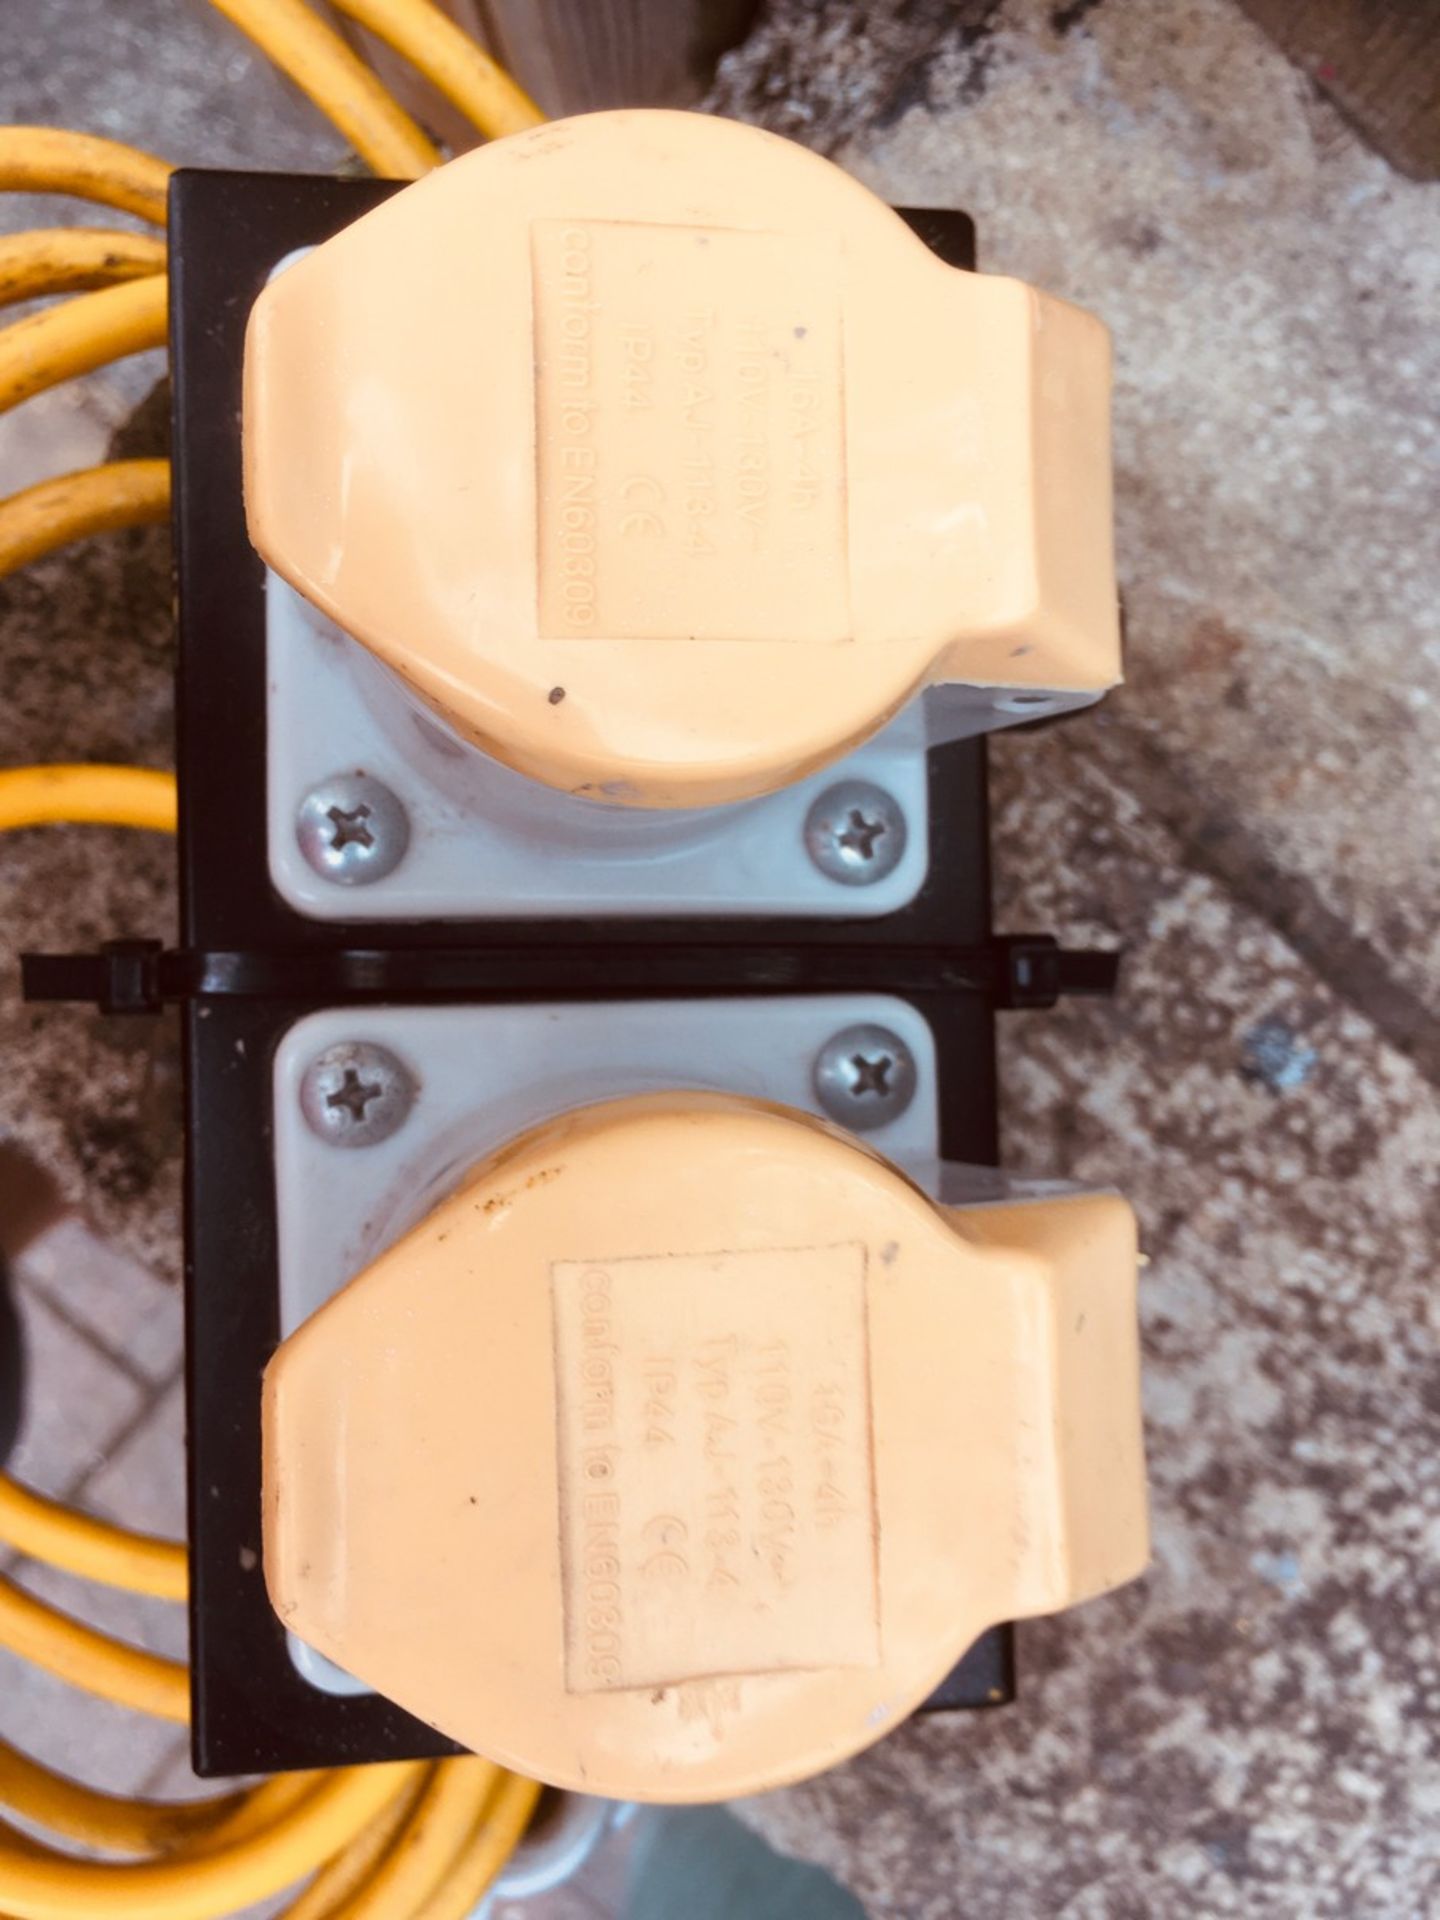 3 x double surface 110v sockets complete with cable *NO VAT* - Image 3 of 3